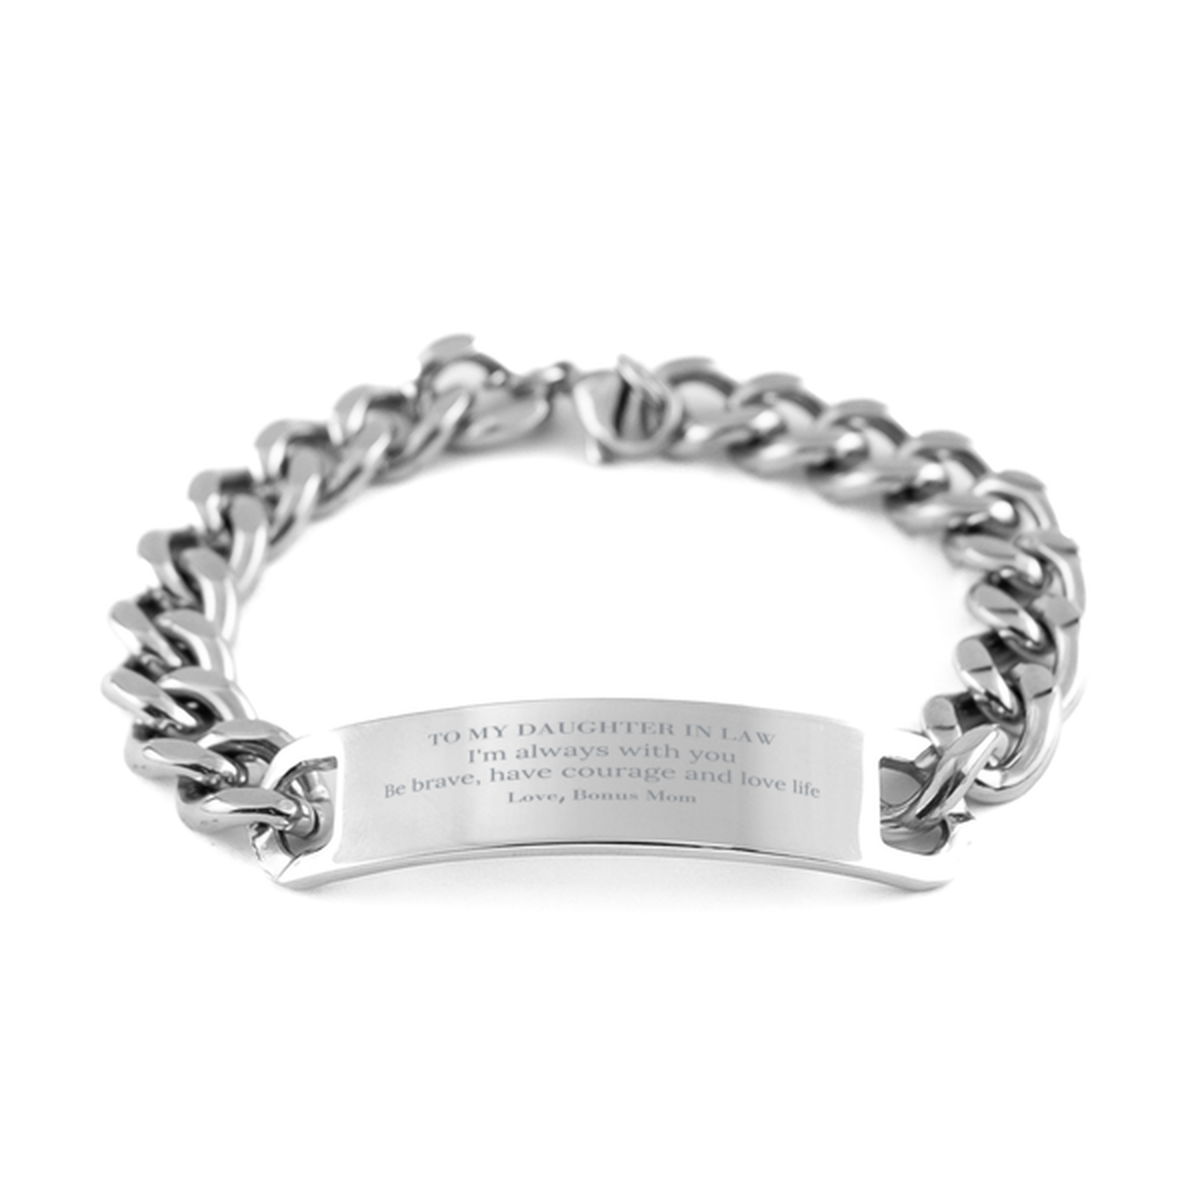 To My Daughter In Law Gifts from Bonus Mom, Unique Cuban Chain Stainless Steel Bracelet Inspirational Christmas Birthday Graduation Gifts for Daughter In Law I'm always with you. Be brave, have courage and love life. Love, Bonus Mom